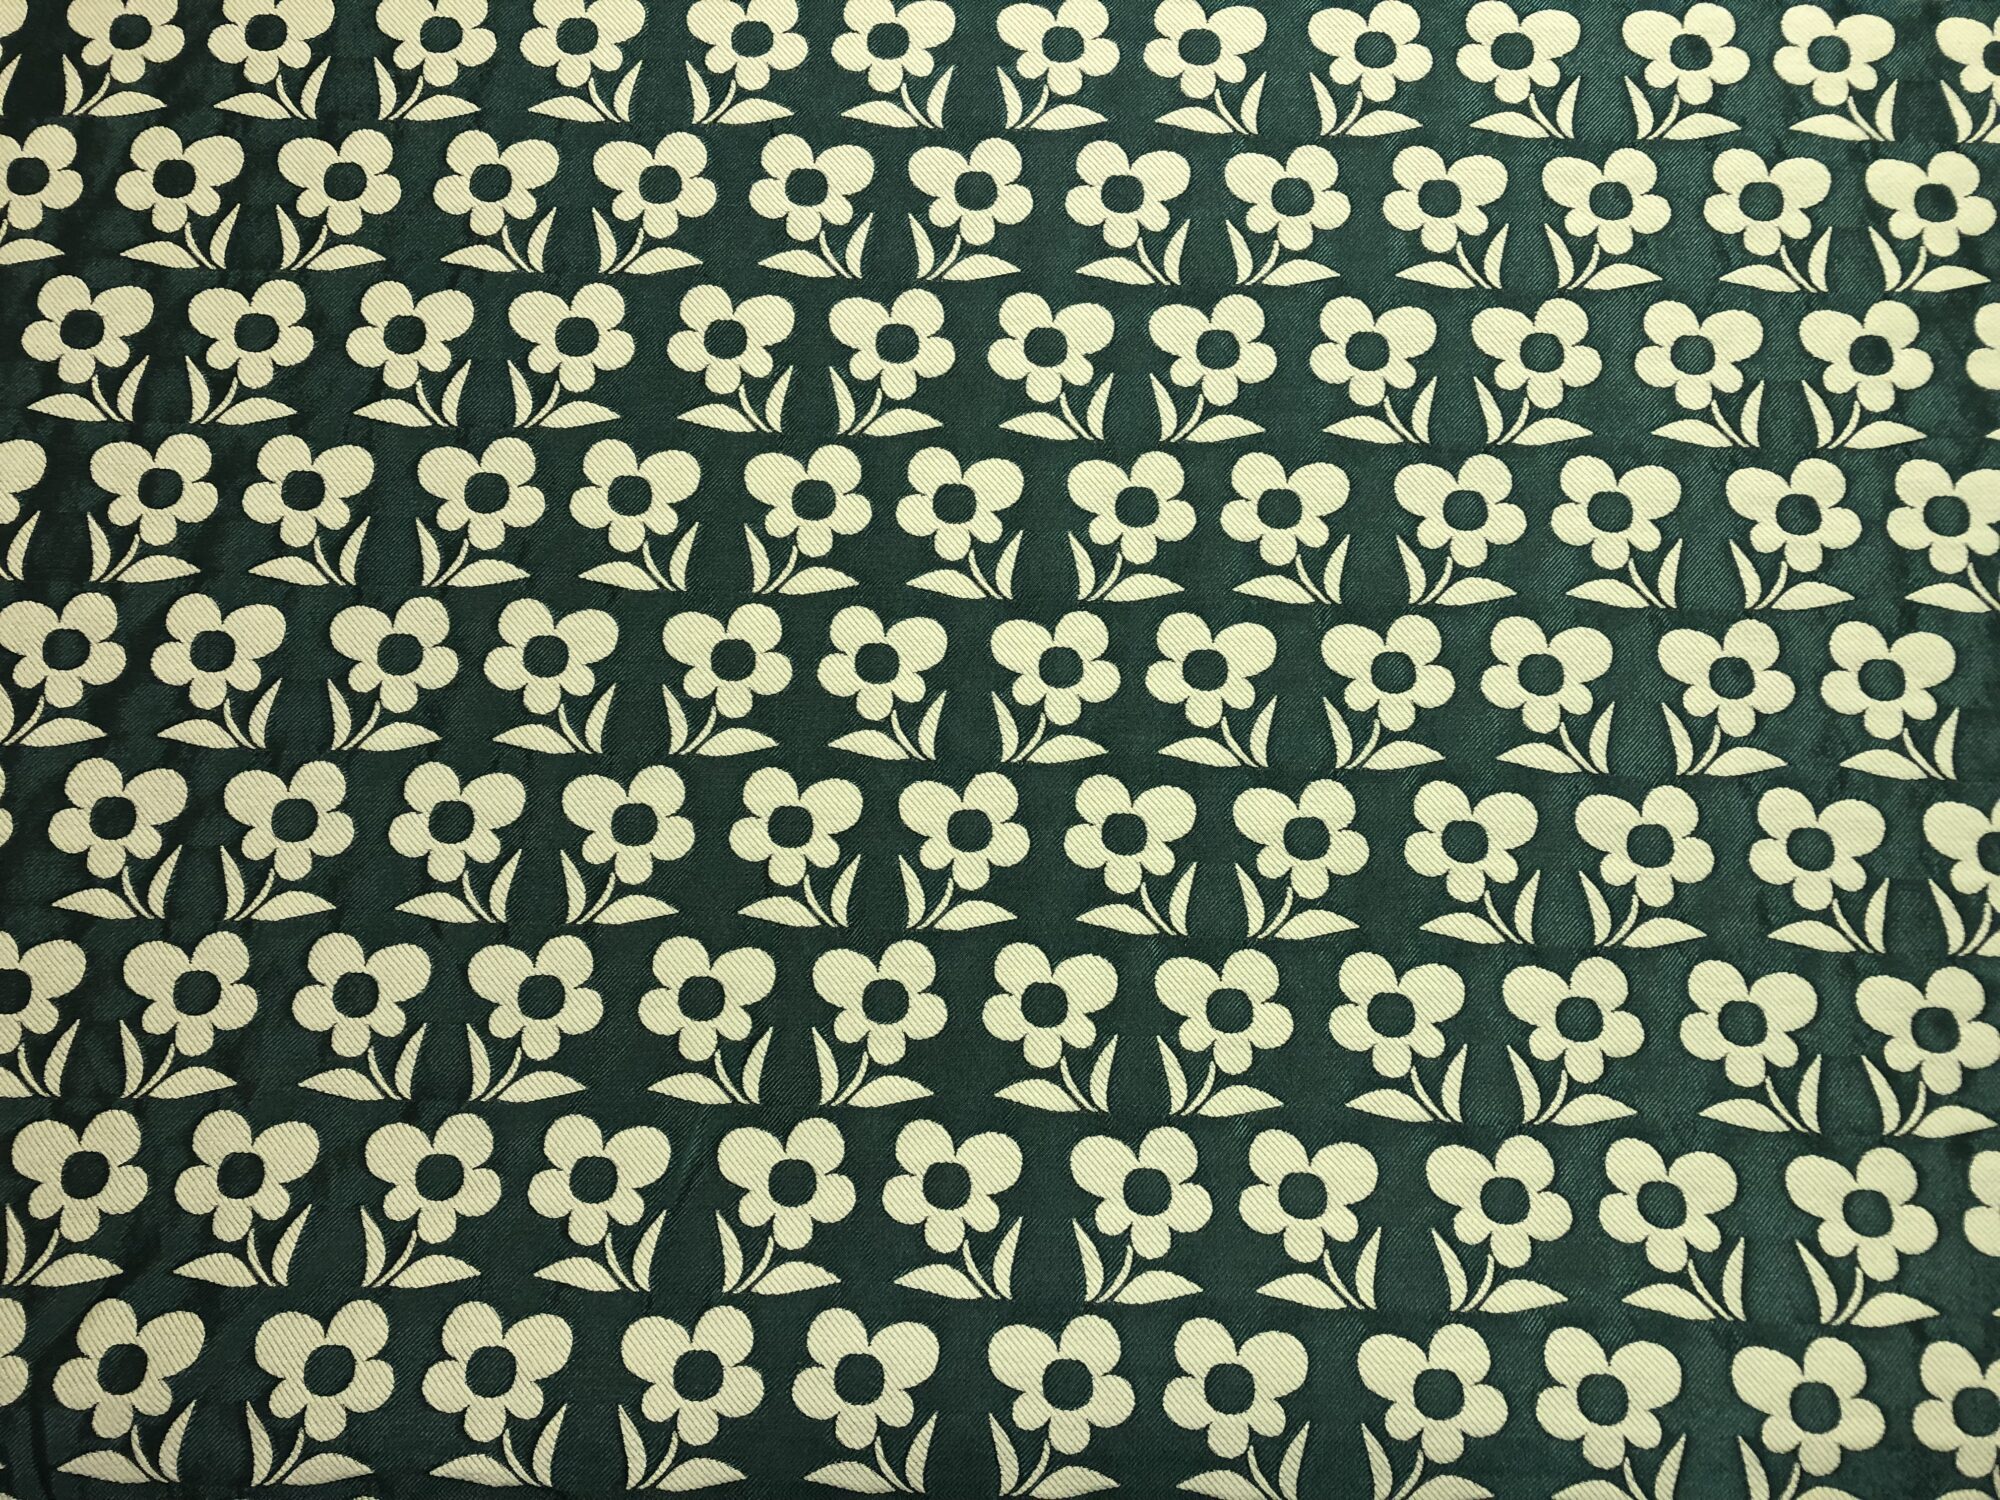 Cotton Denim Twill Fabric with lifted Floral Pattern, Metallic Finish ...